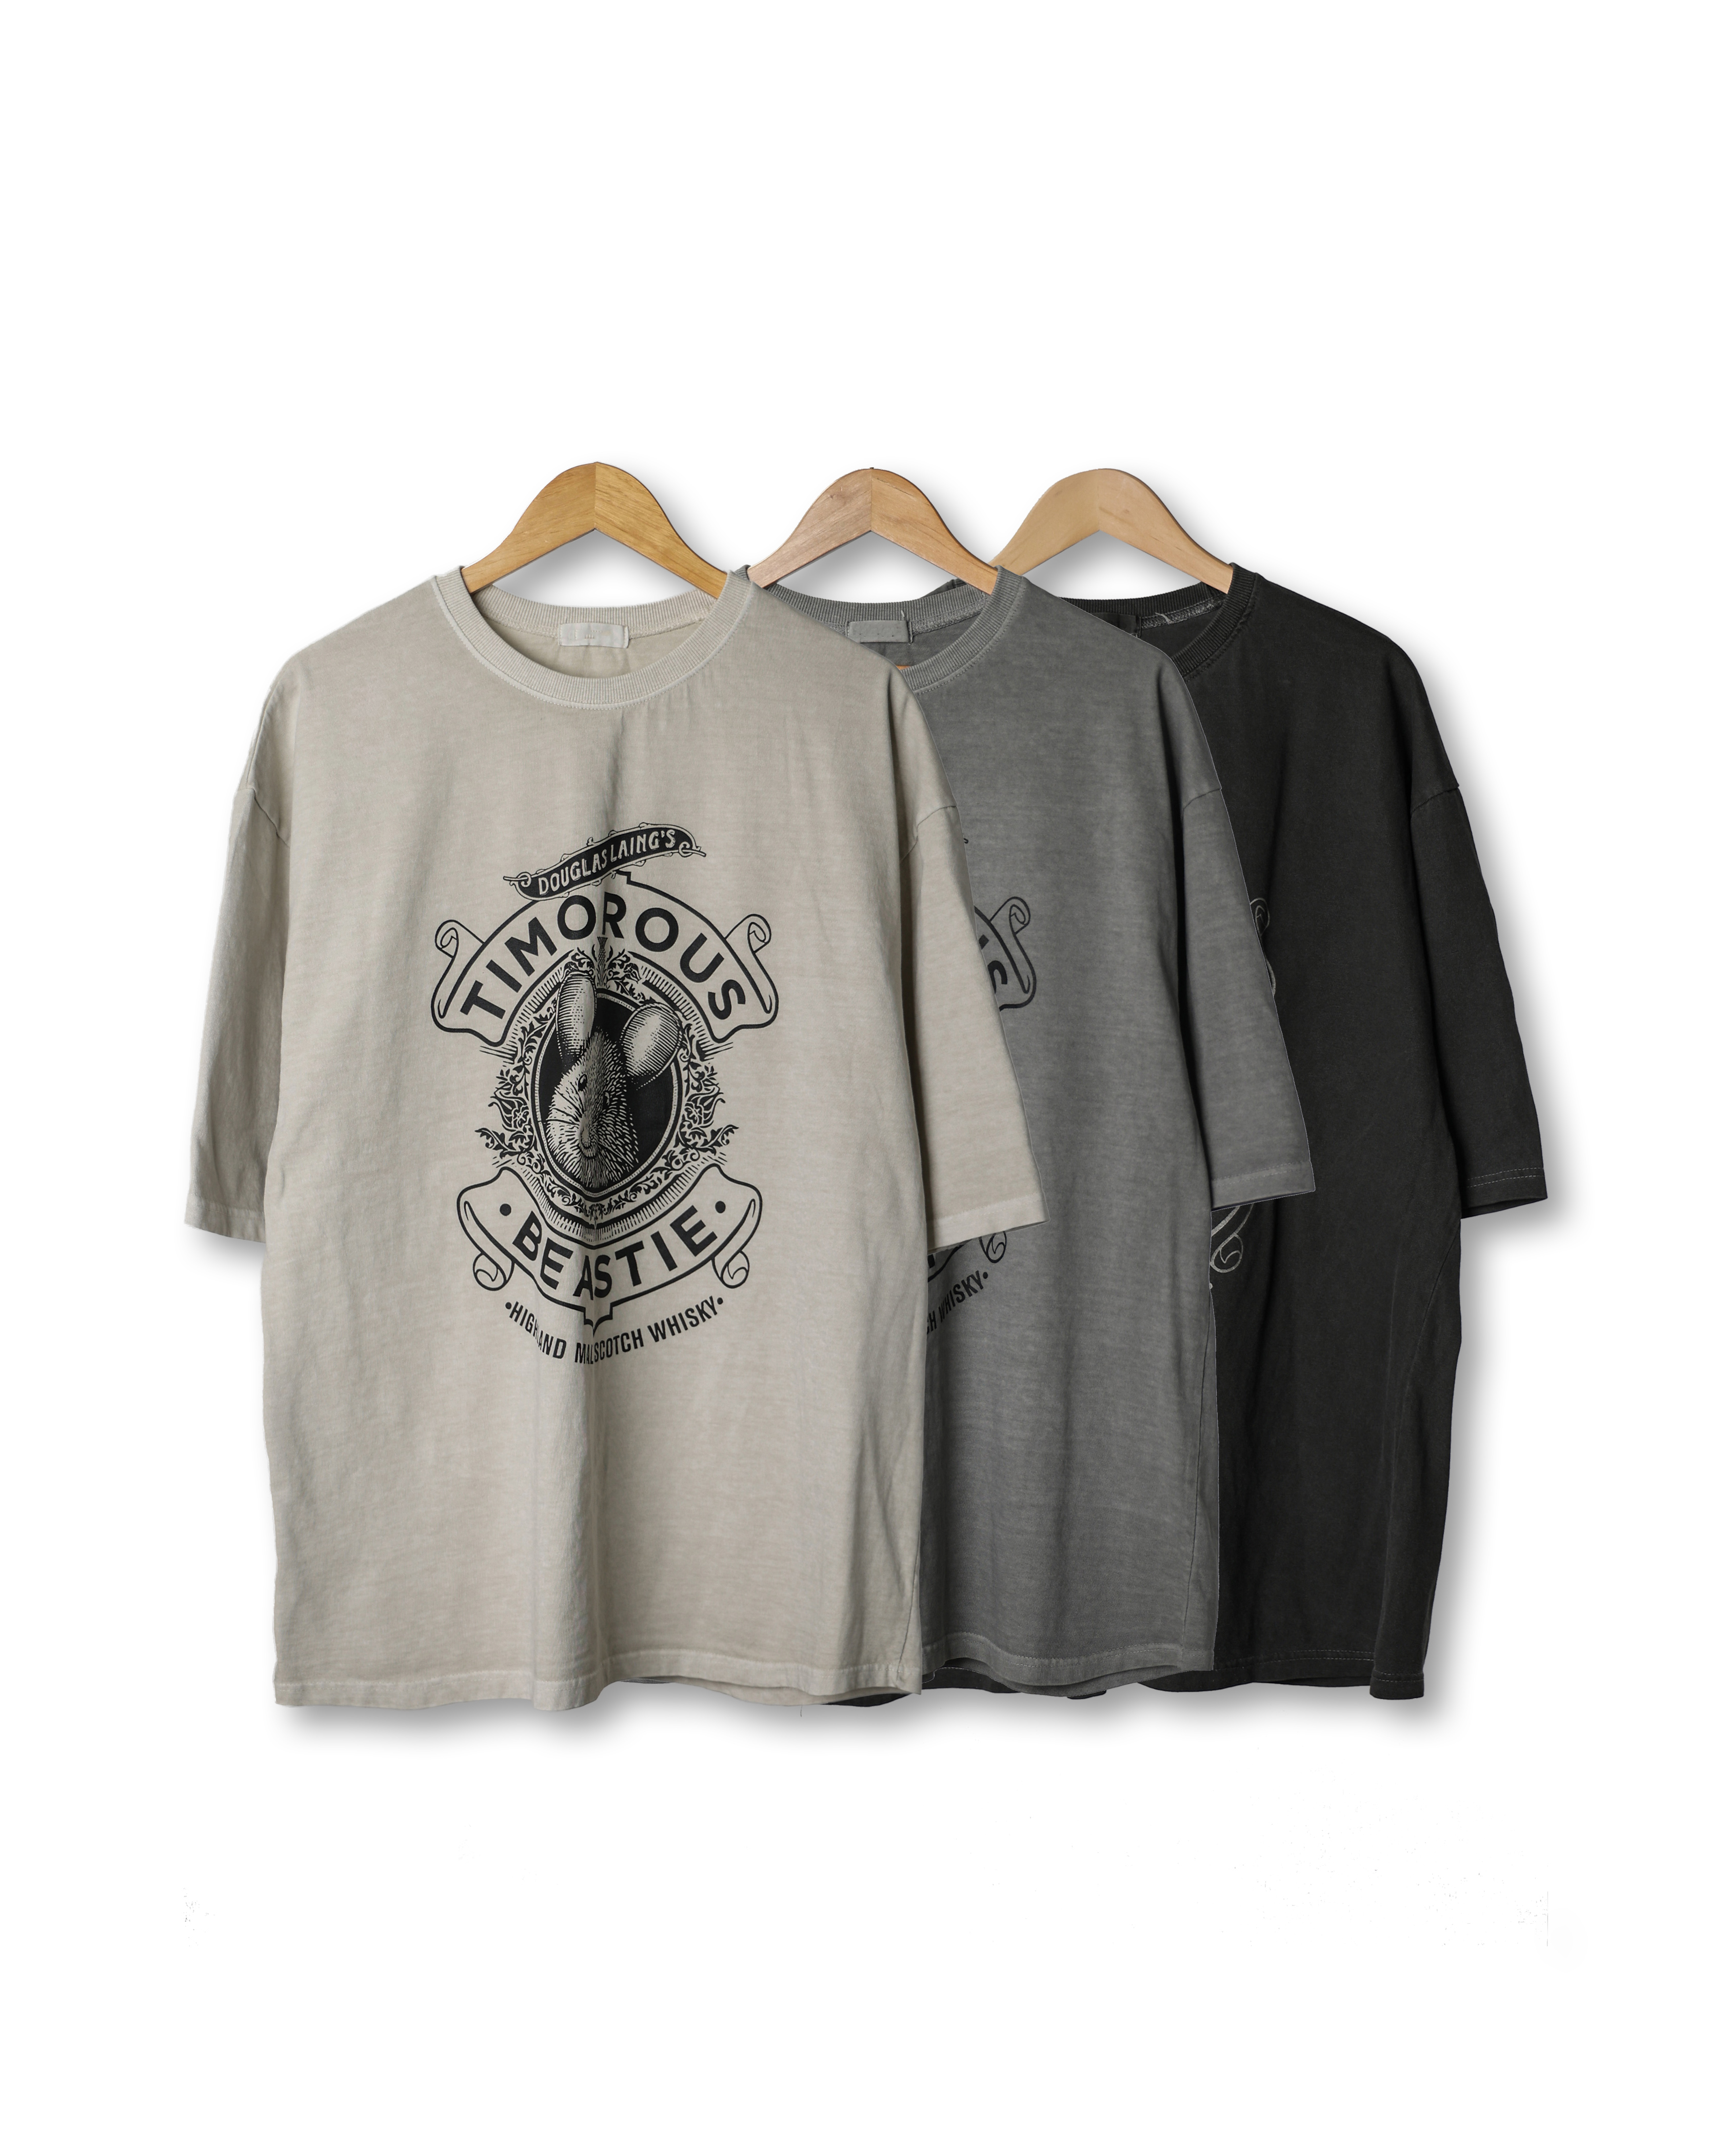 PRCNT TIMOROUS Pigments Over T Shirts (Charcoal/gray/Oat Beige) - 3차 리오더 (5/24 배송예정)